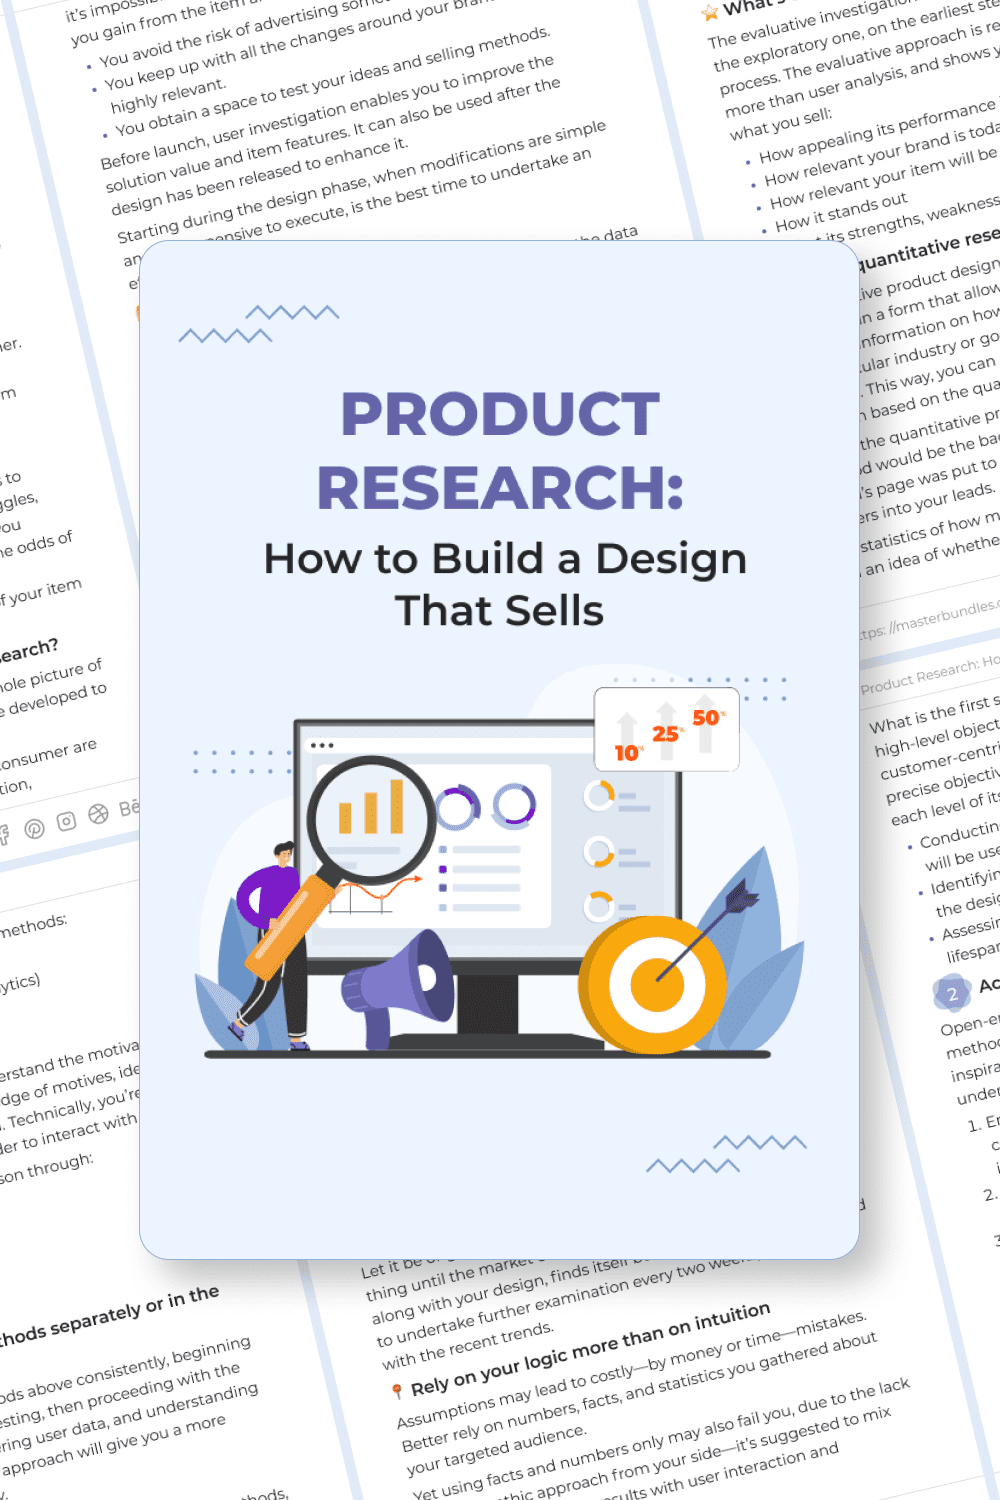 4 product research how to build a design that sells 55.